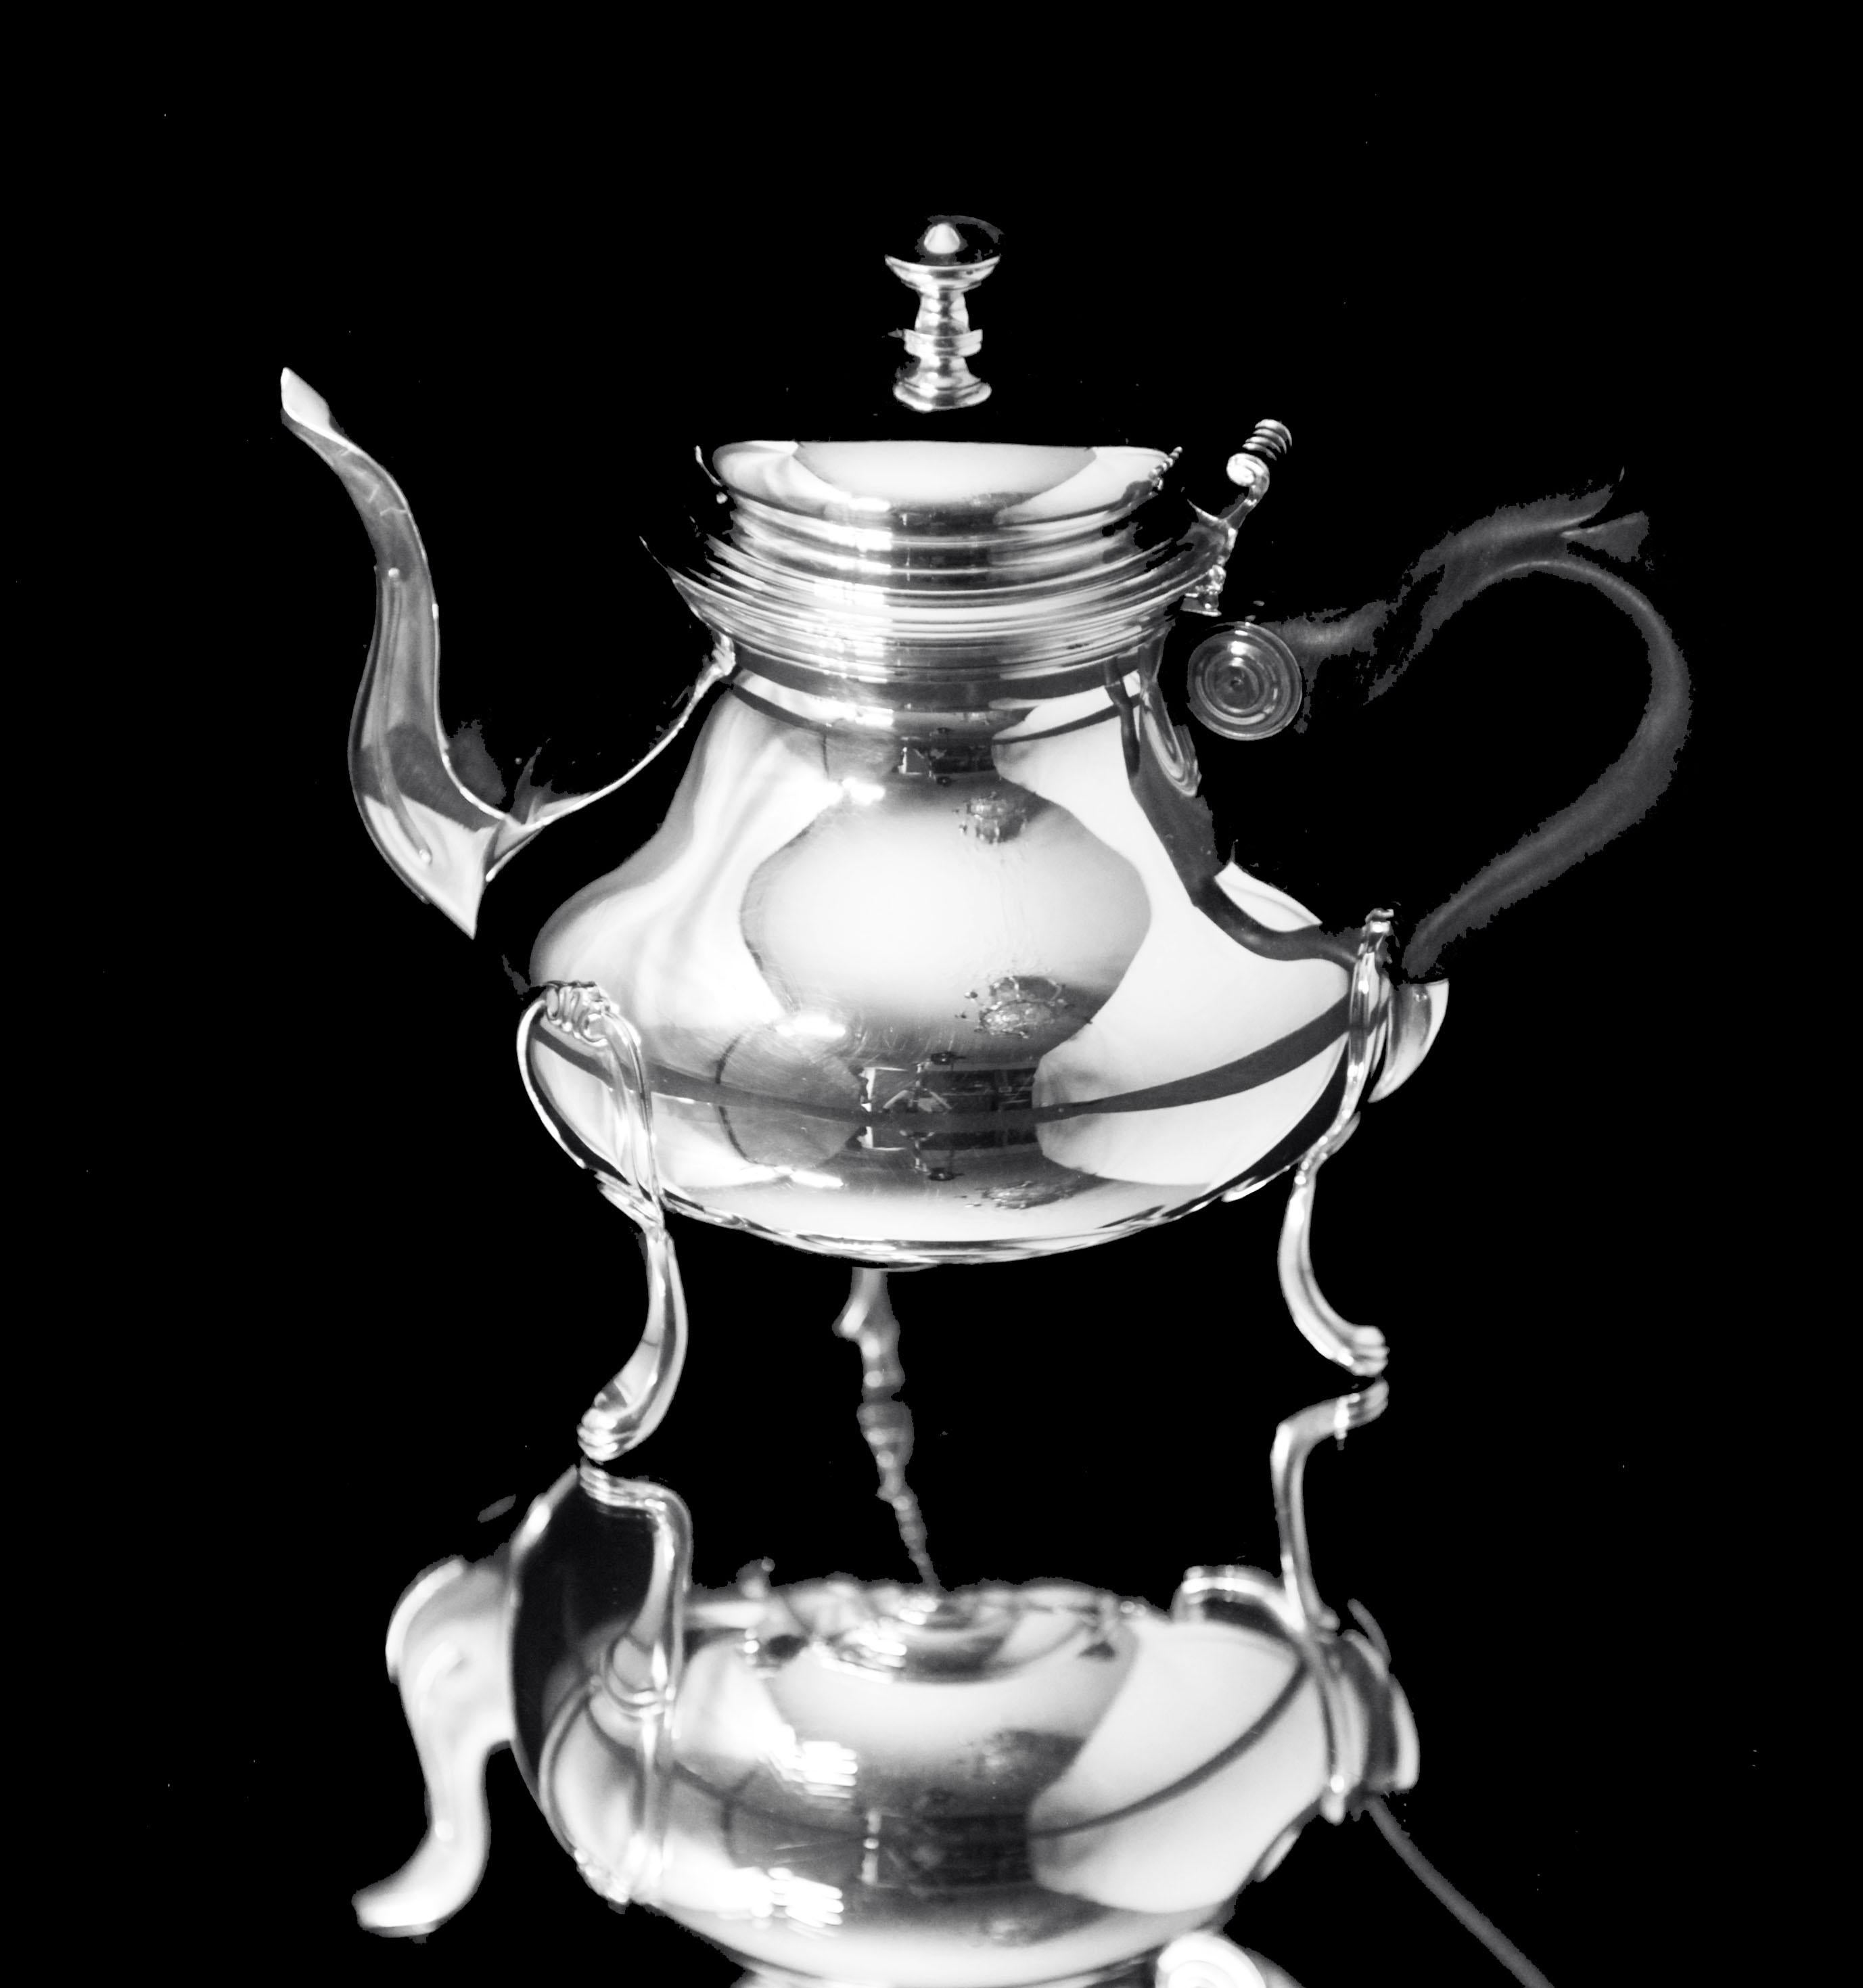 19th Century Odiot Henin - 5pc. Antique French 950 Sterling Silver Louis XVI Tea Set + Tray For Sale